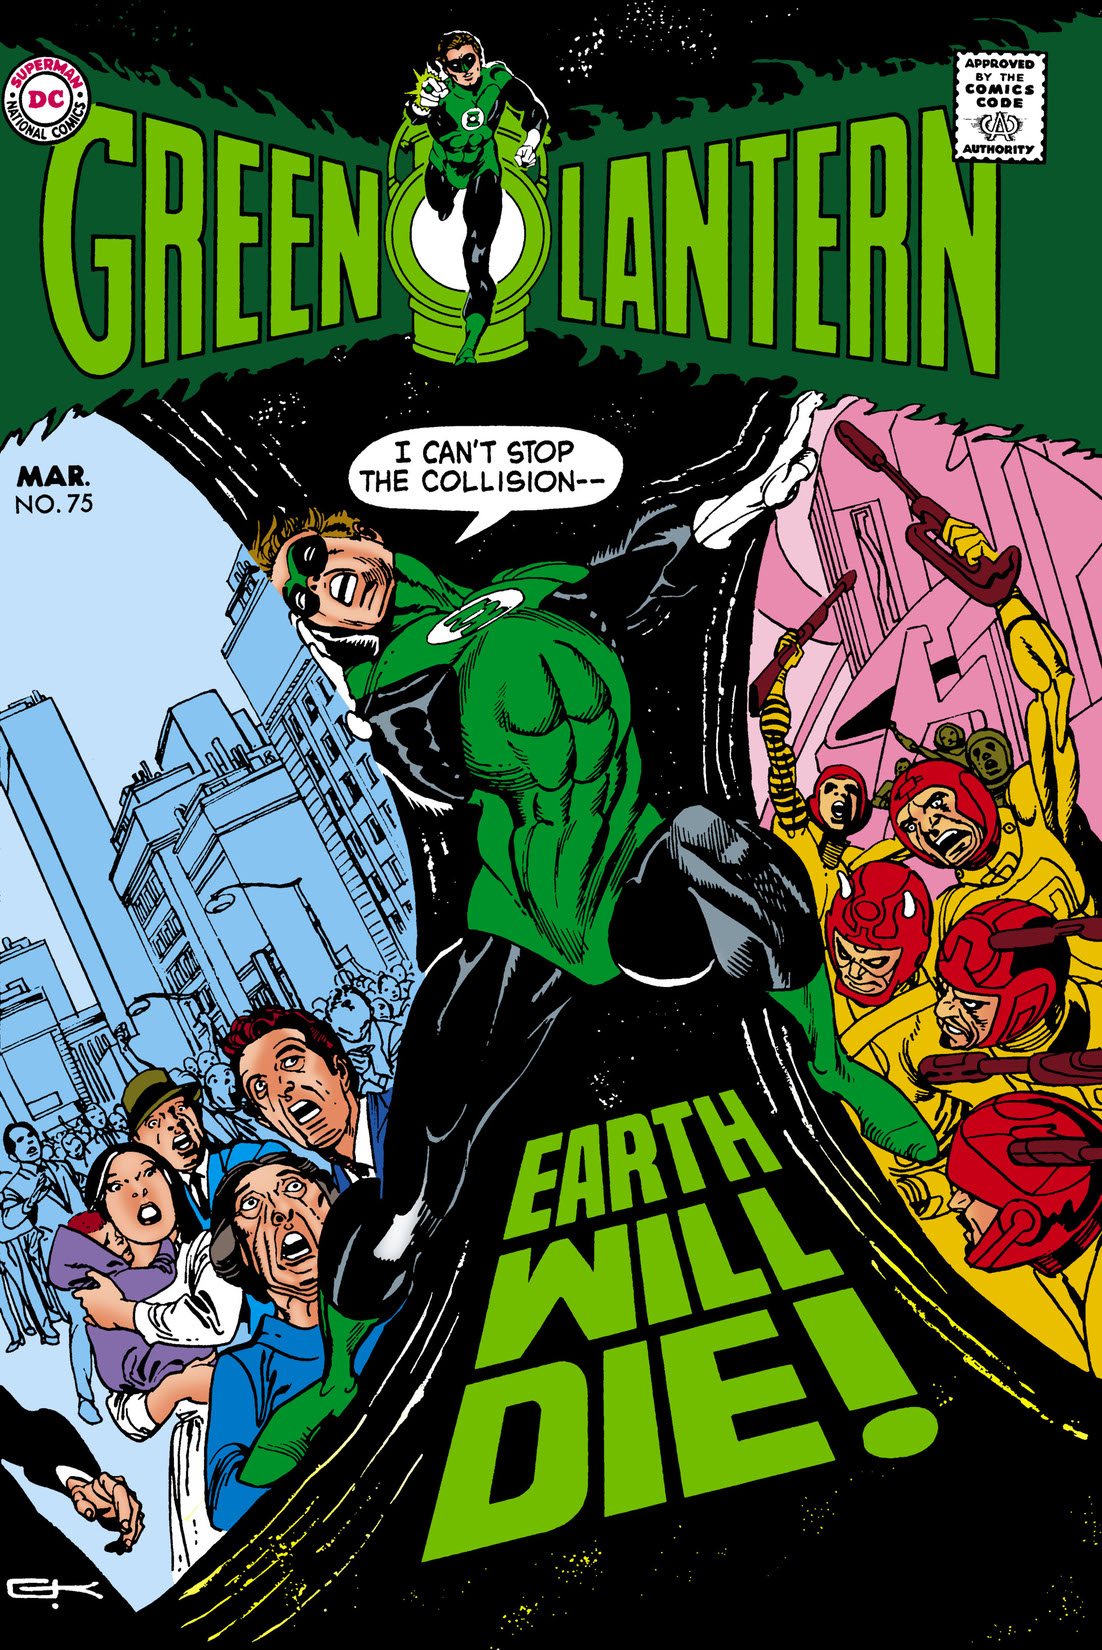 Green Lantern (1960-) #75 preview images